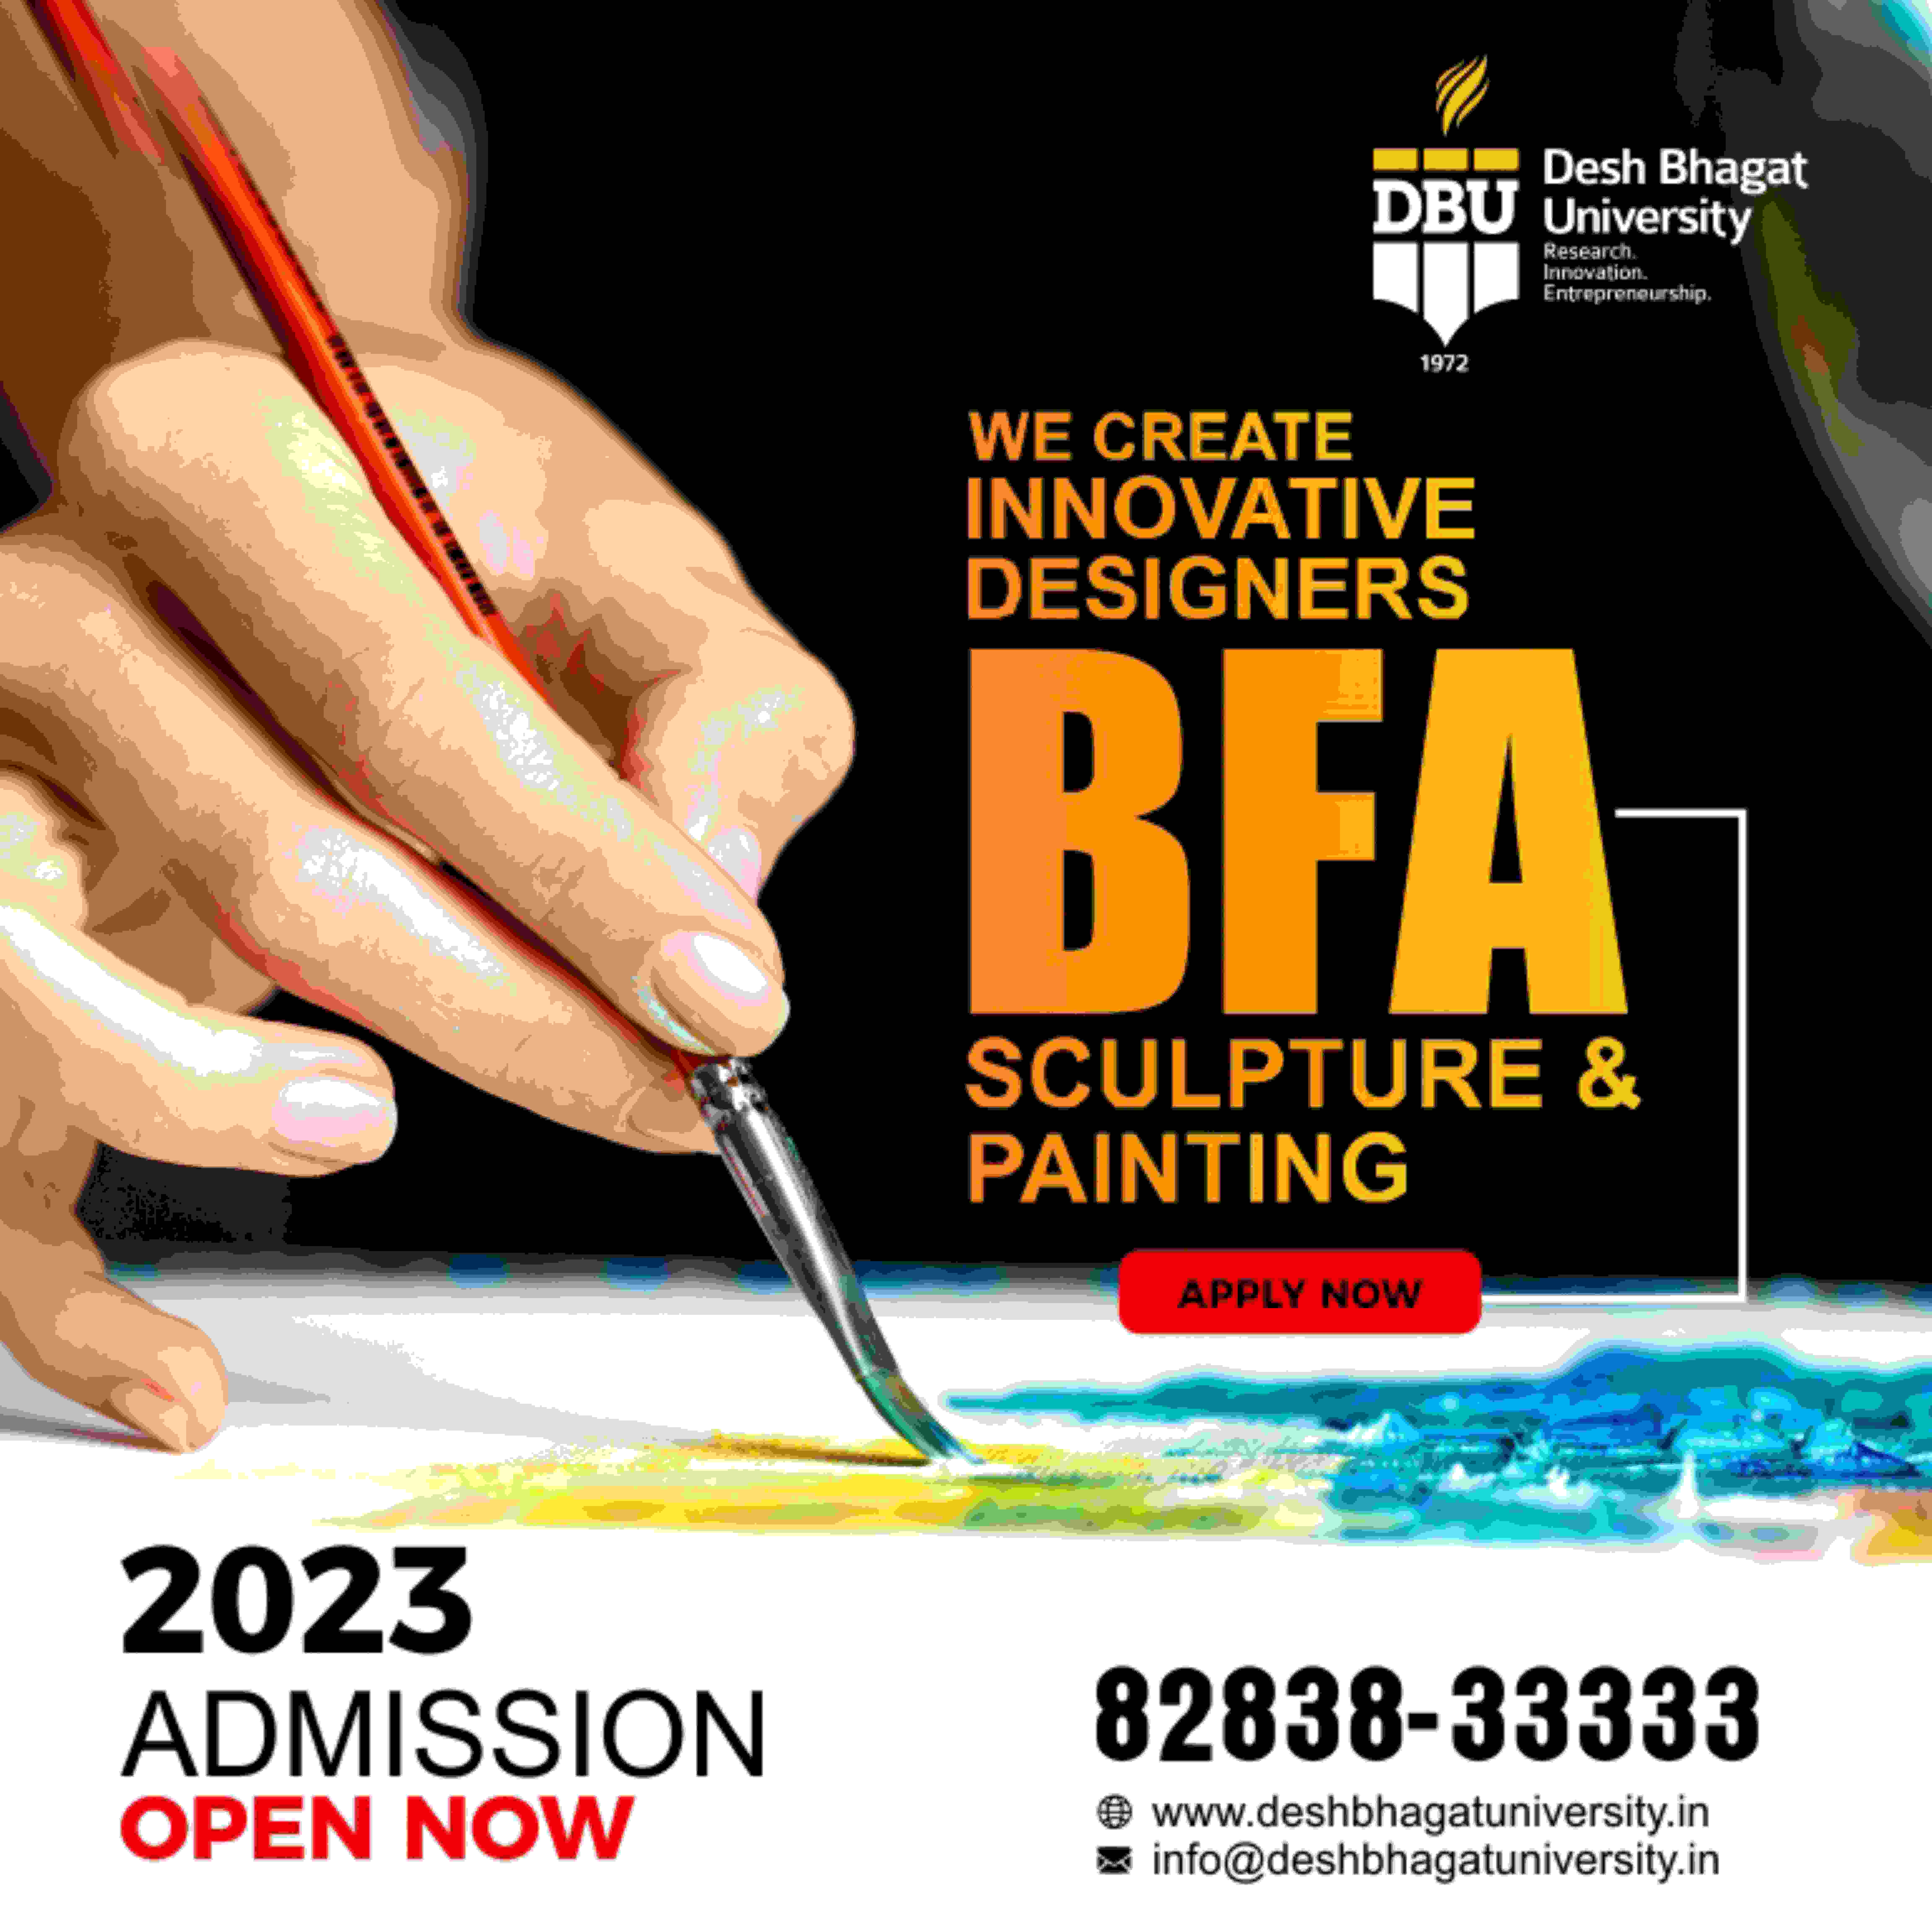 Faculty of BFL Sculpture & painting